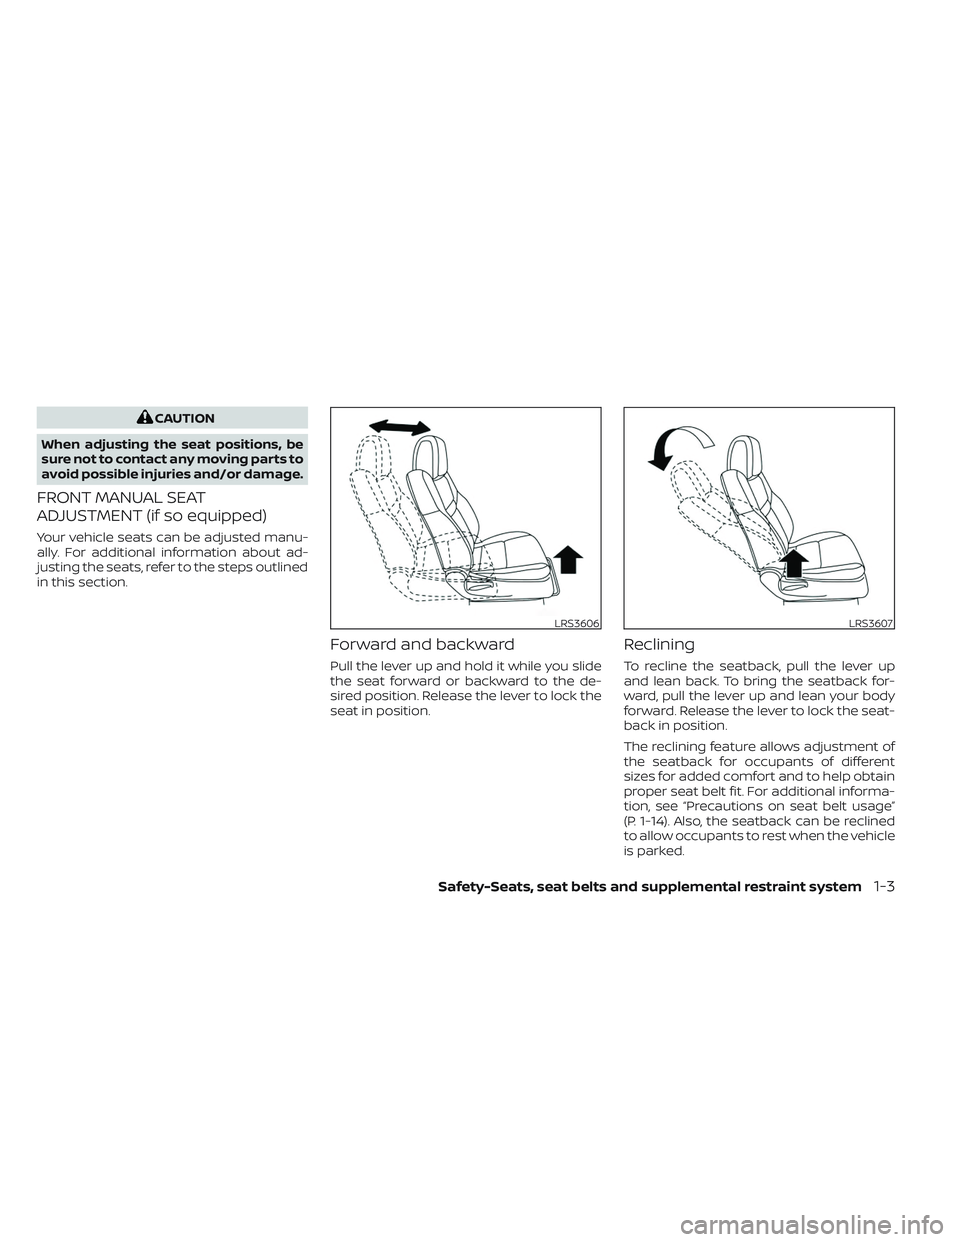 NISSAN FRONTIER 2023 Owners Manual CAUTION
When adjusting the seat positions, be
sure not to contact any moving parts to
avoid possible injuries and/or damage.
FRONT MANUAL SEAT
ADJUSTMENT (if so equipped)
Your vehicle seats can be adj